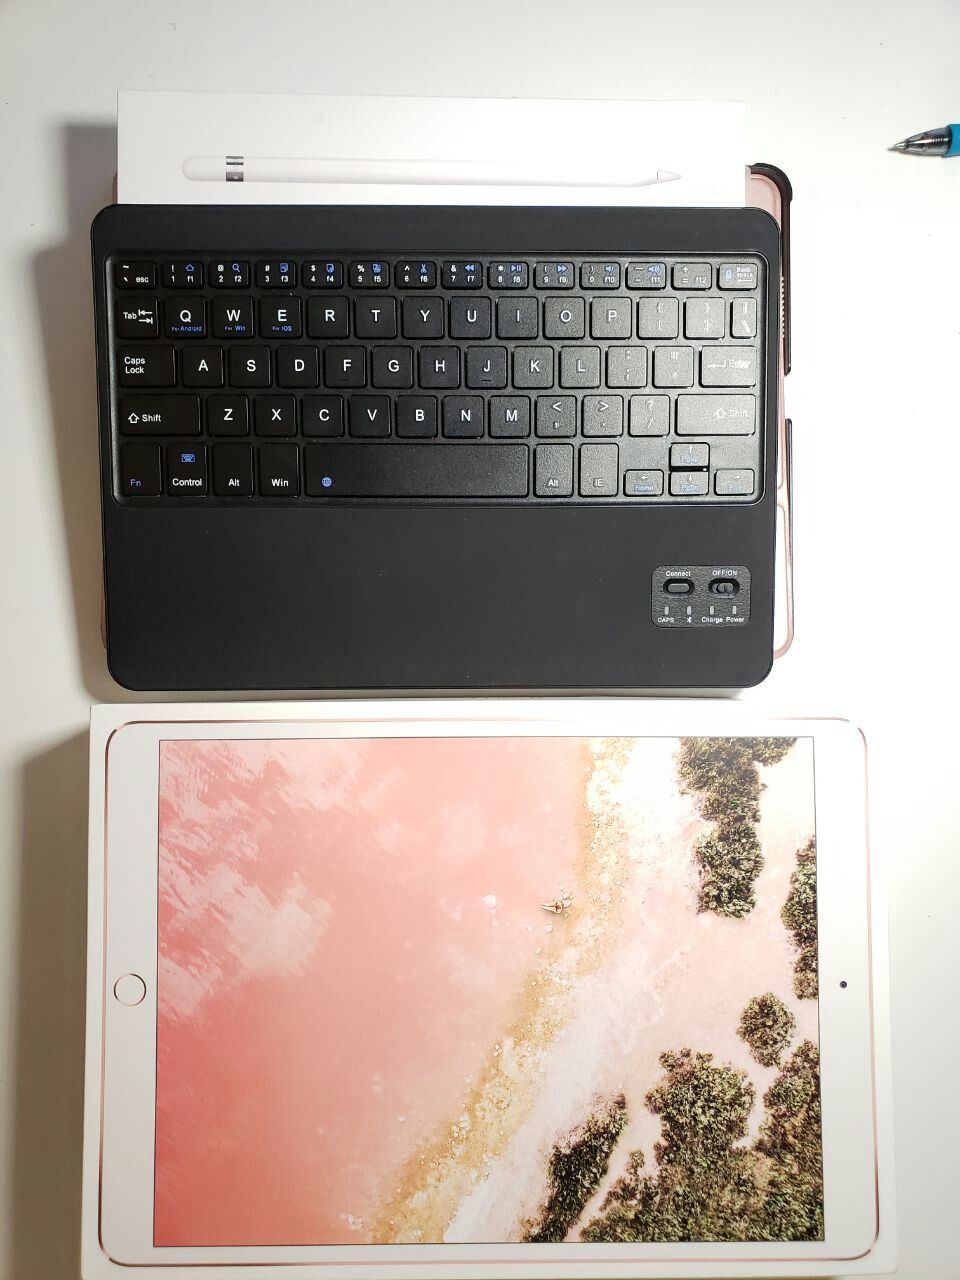 IPad Pro 64 GB 10.5 inch with Apple pencil and two covers with keyboard.